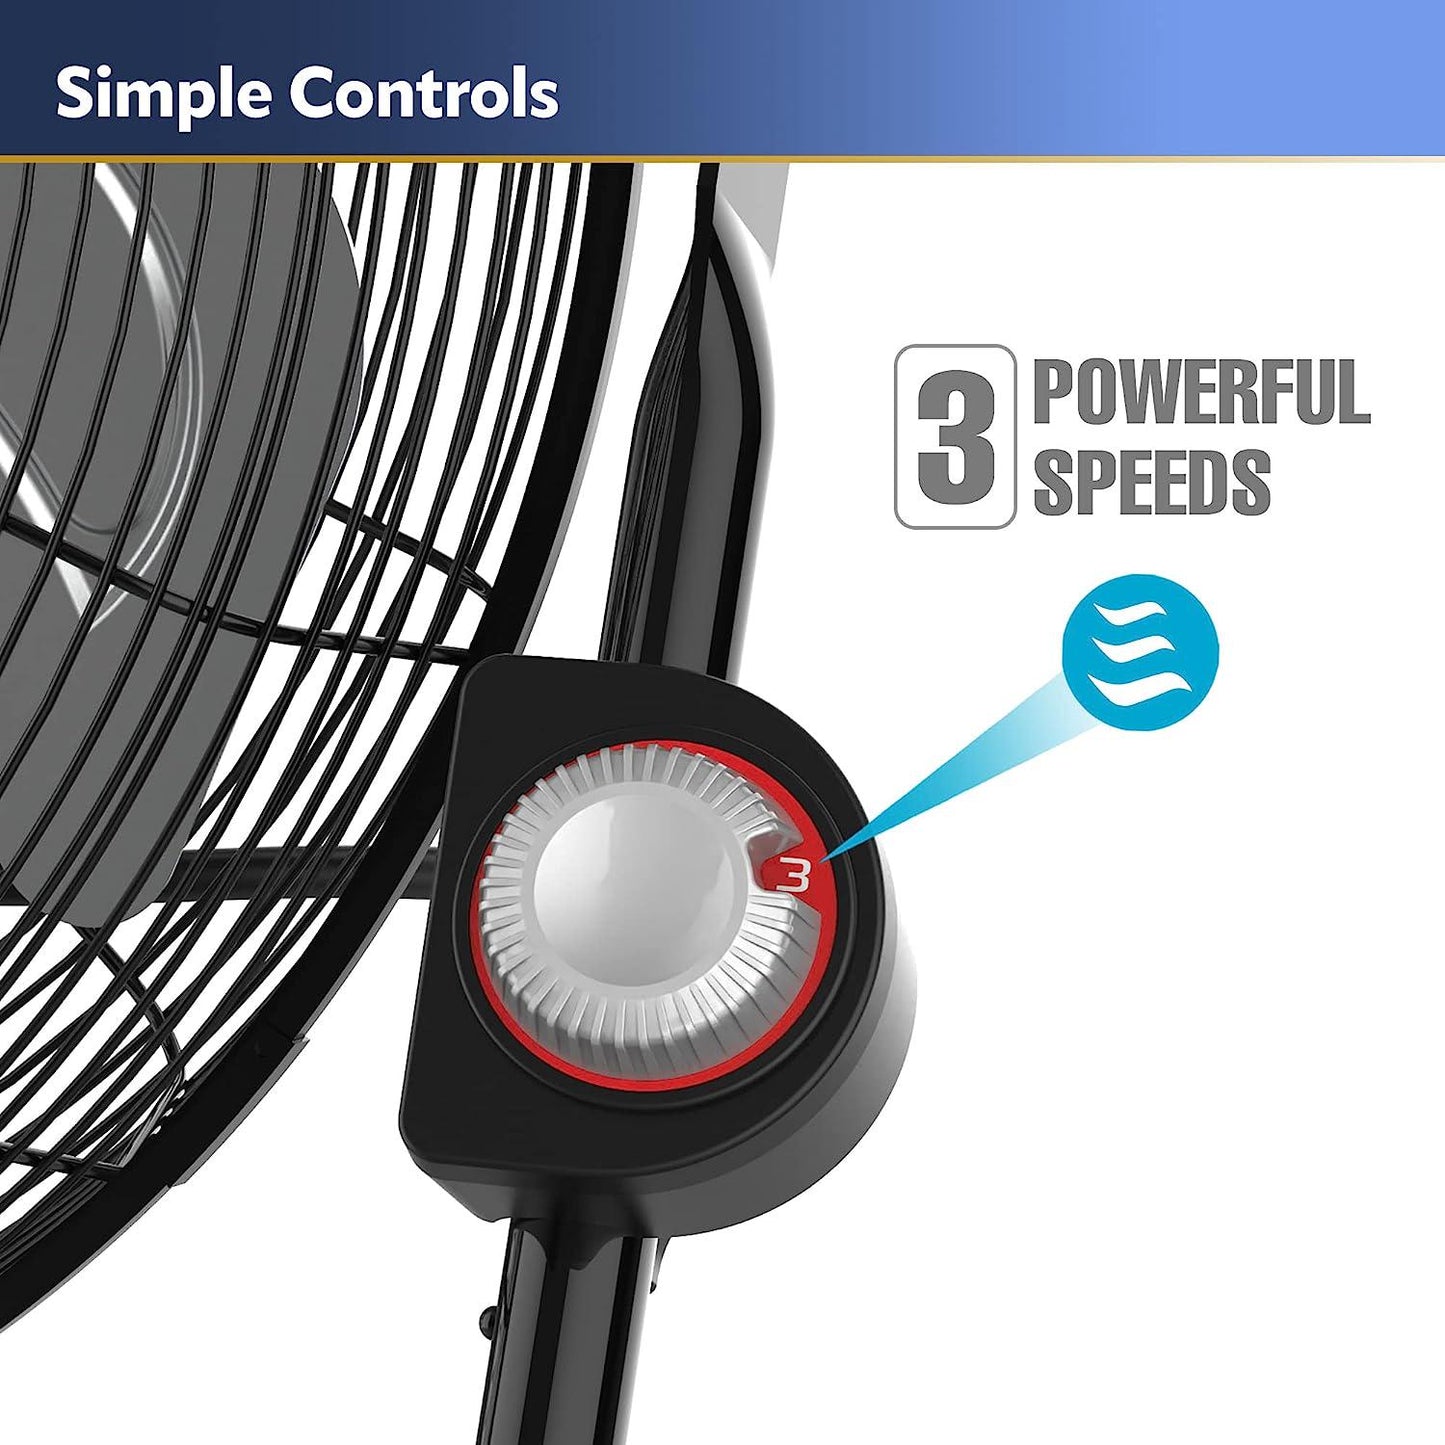 High Velocity Floor Fan with Wall mount Option, 3 Powerful Speeds, Pivoting Fan Head for Home, Garage, Attic, 20 , Black, 2264QM